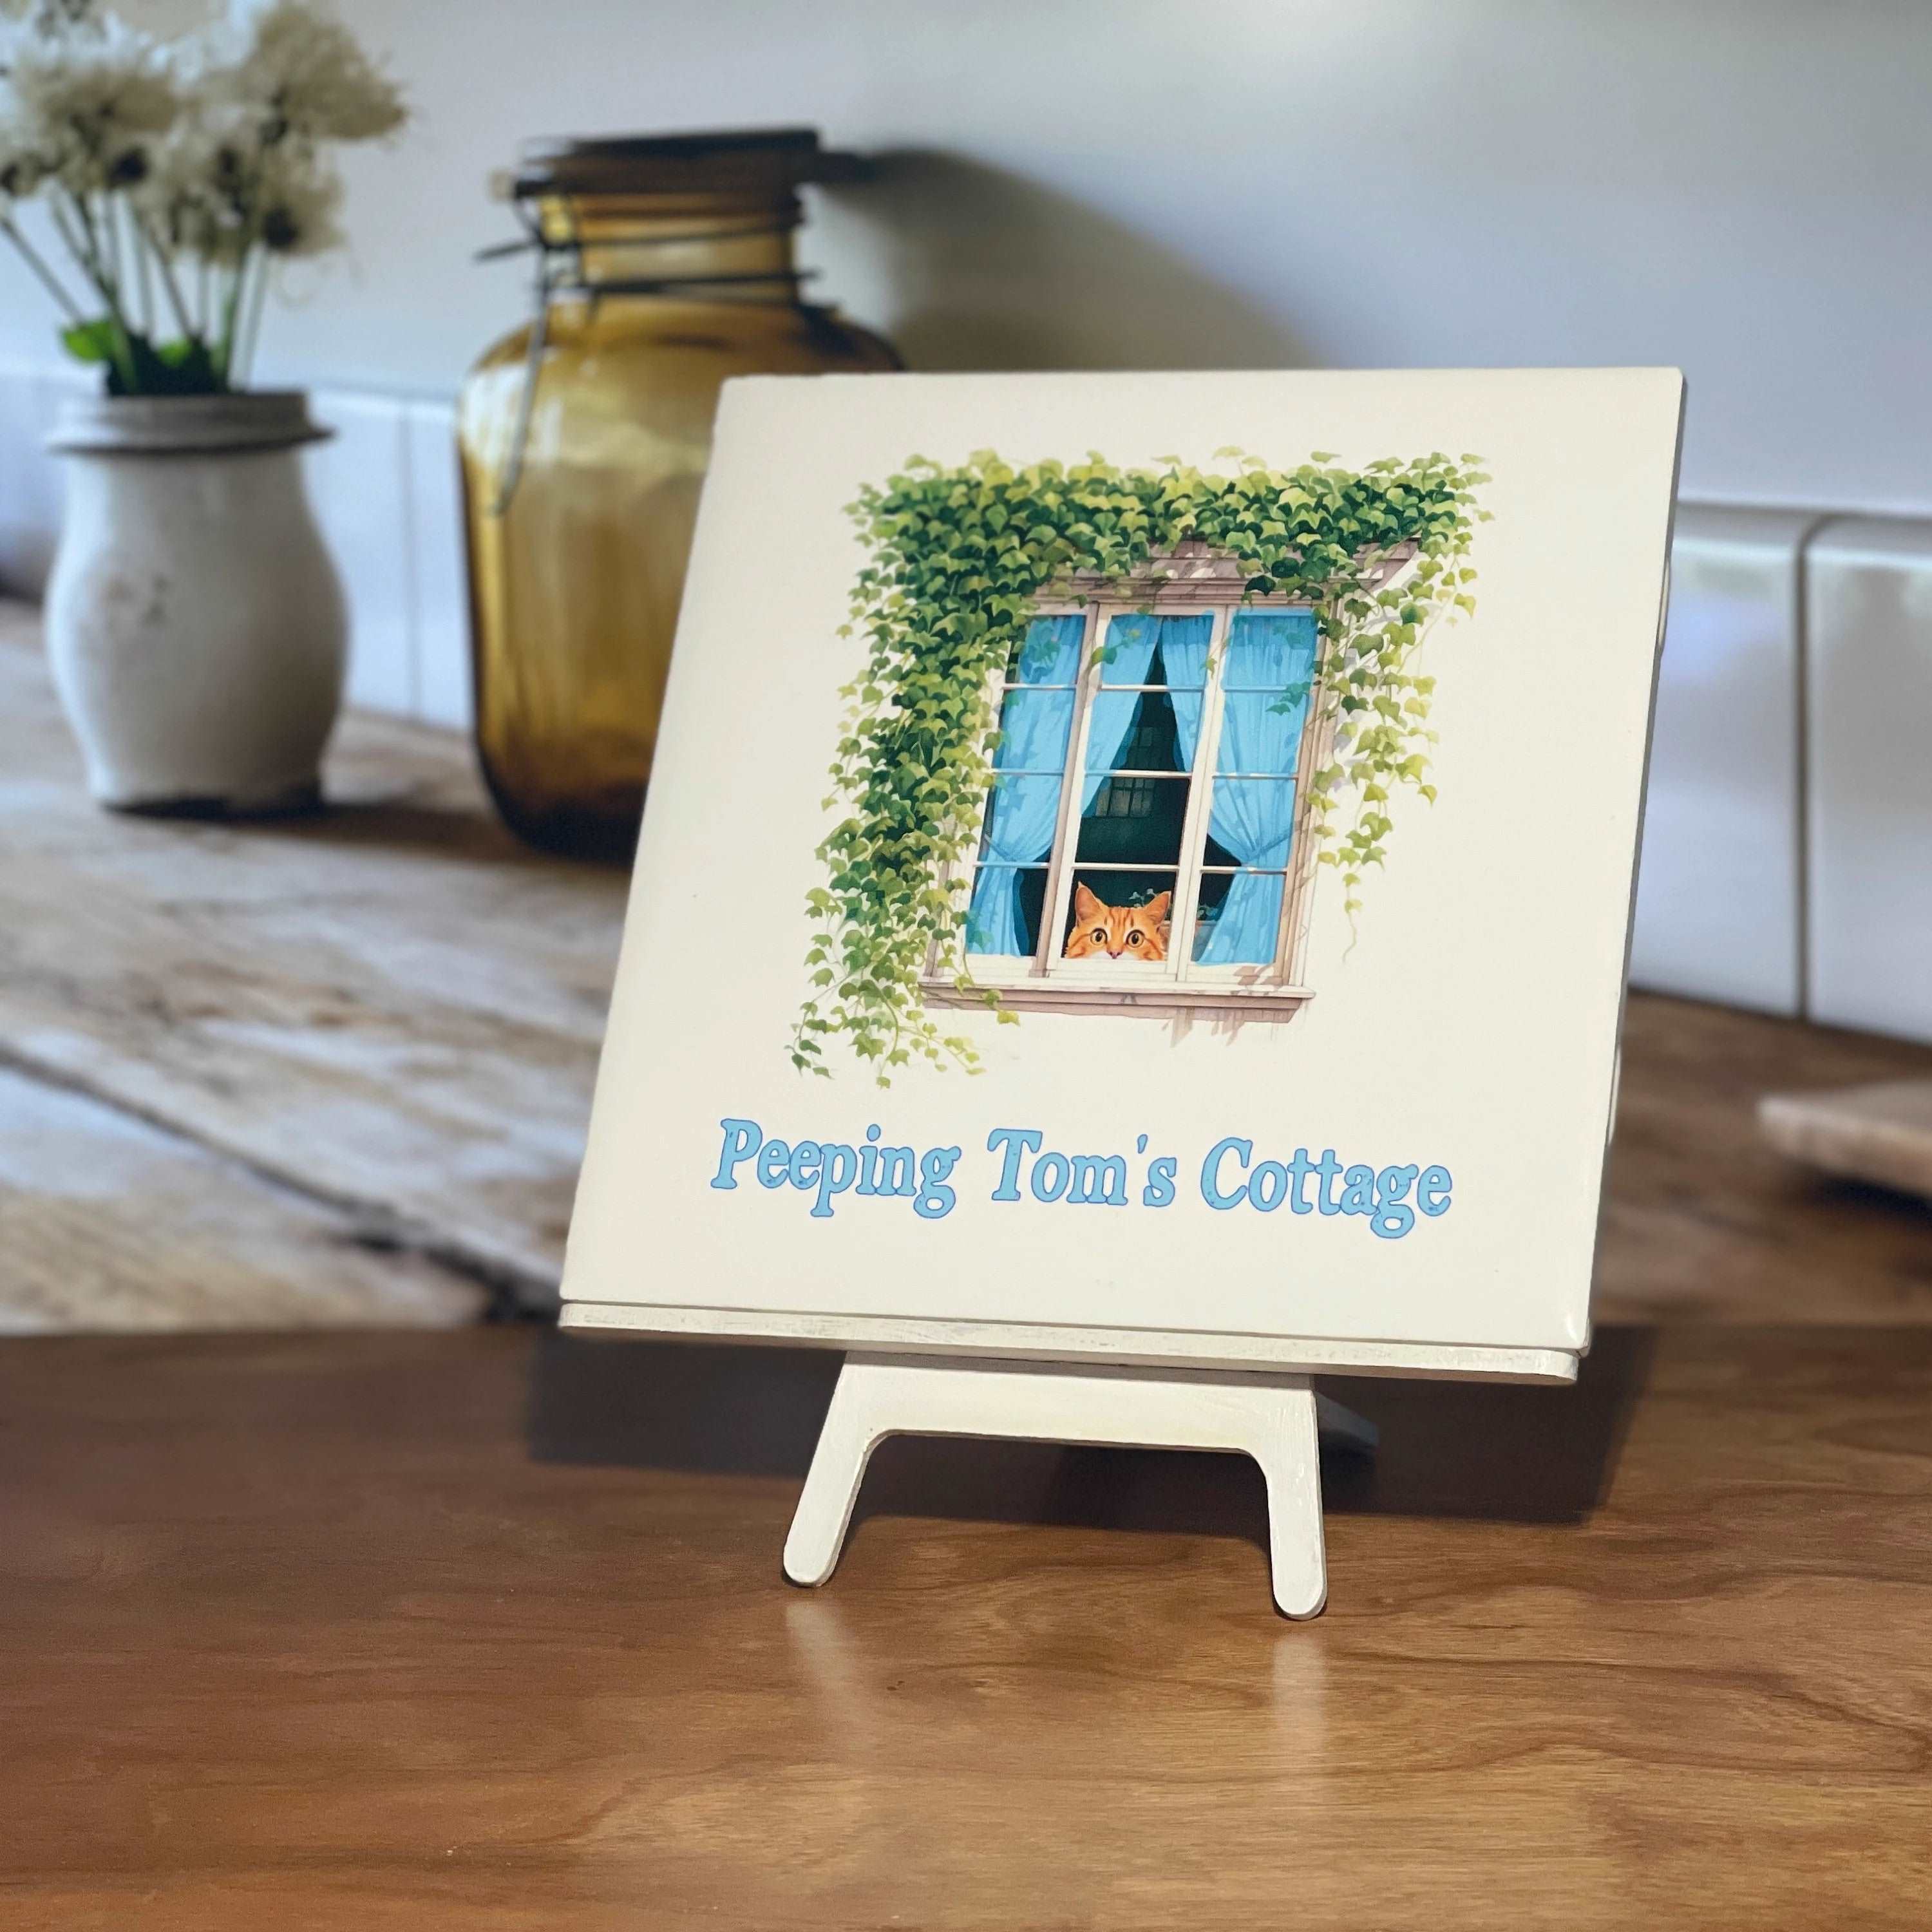 Peeping Tom's Cottage Custom Printed Tile Moonlit Melody: Caroling Cats Handcrafted Art Tile - Whimsical Home Decor